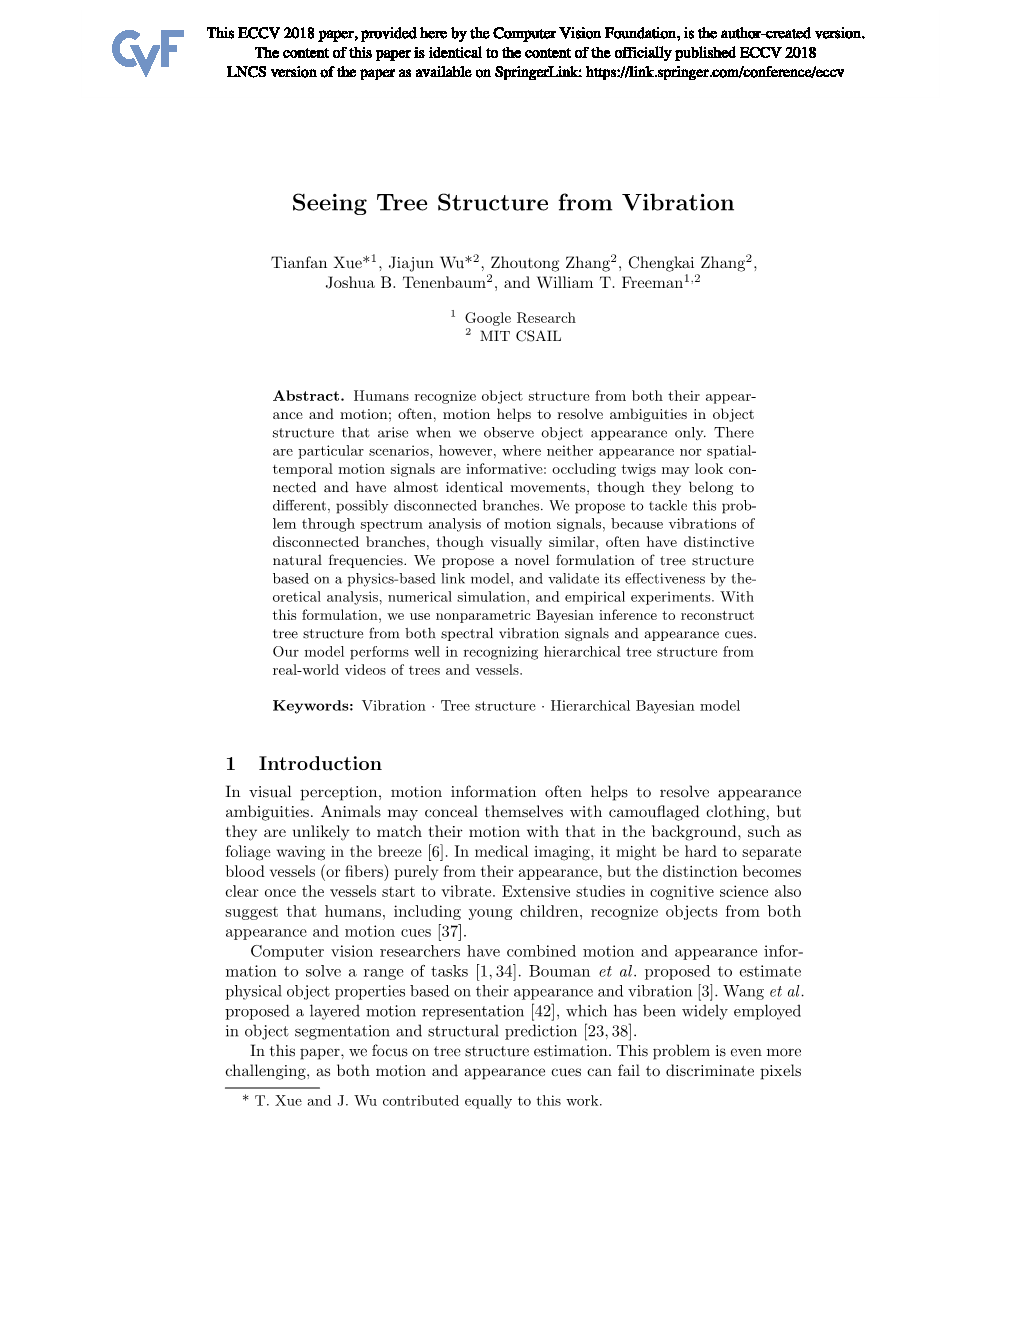 Seeing Tree Structure from Vibration